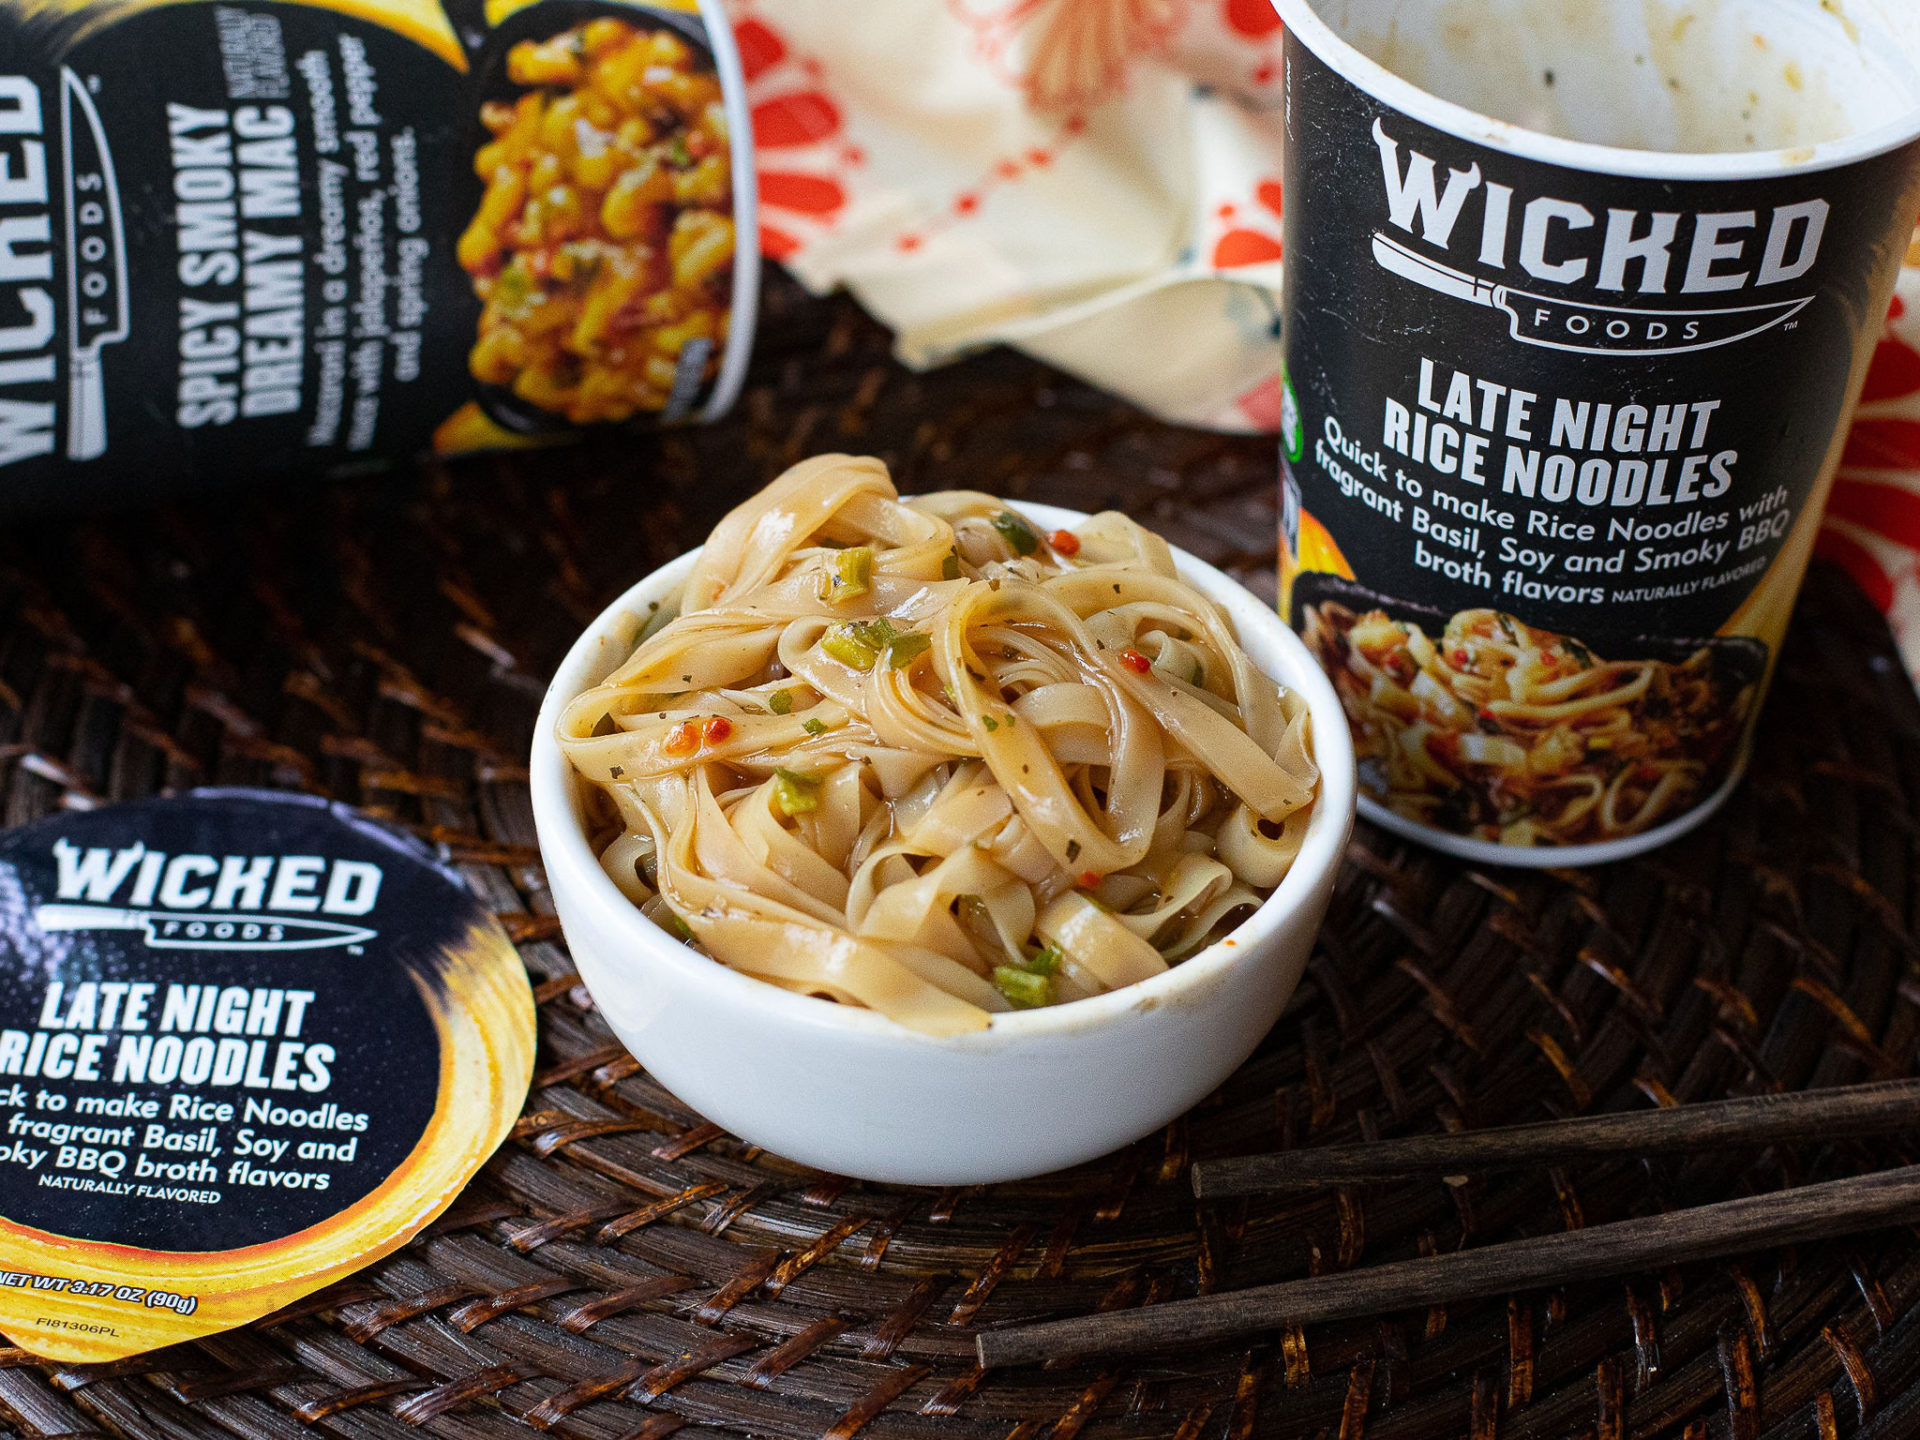 Wicked Kitchen Meal Cups As Low As $1.75 At Kroger